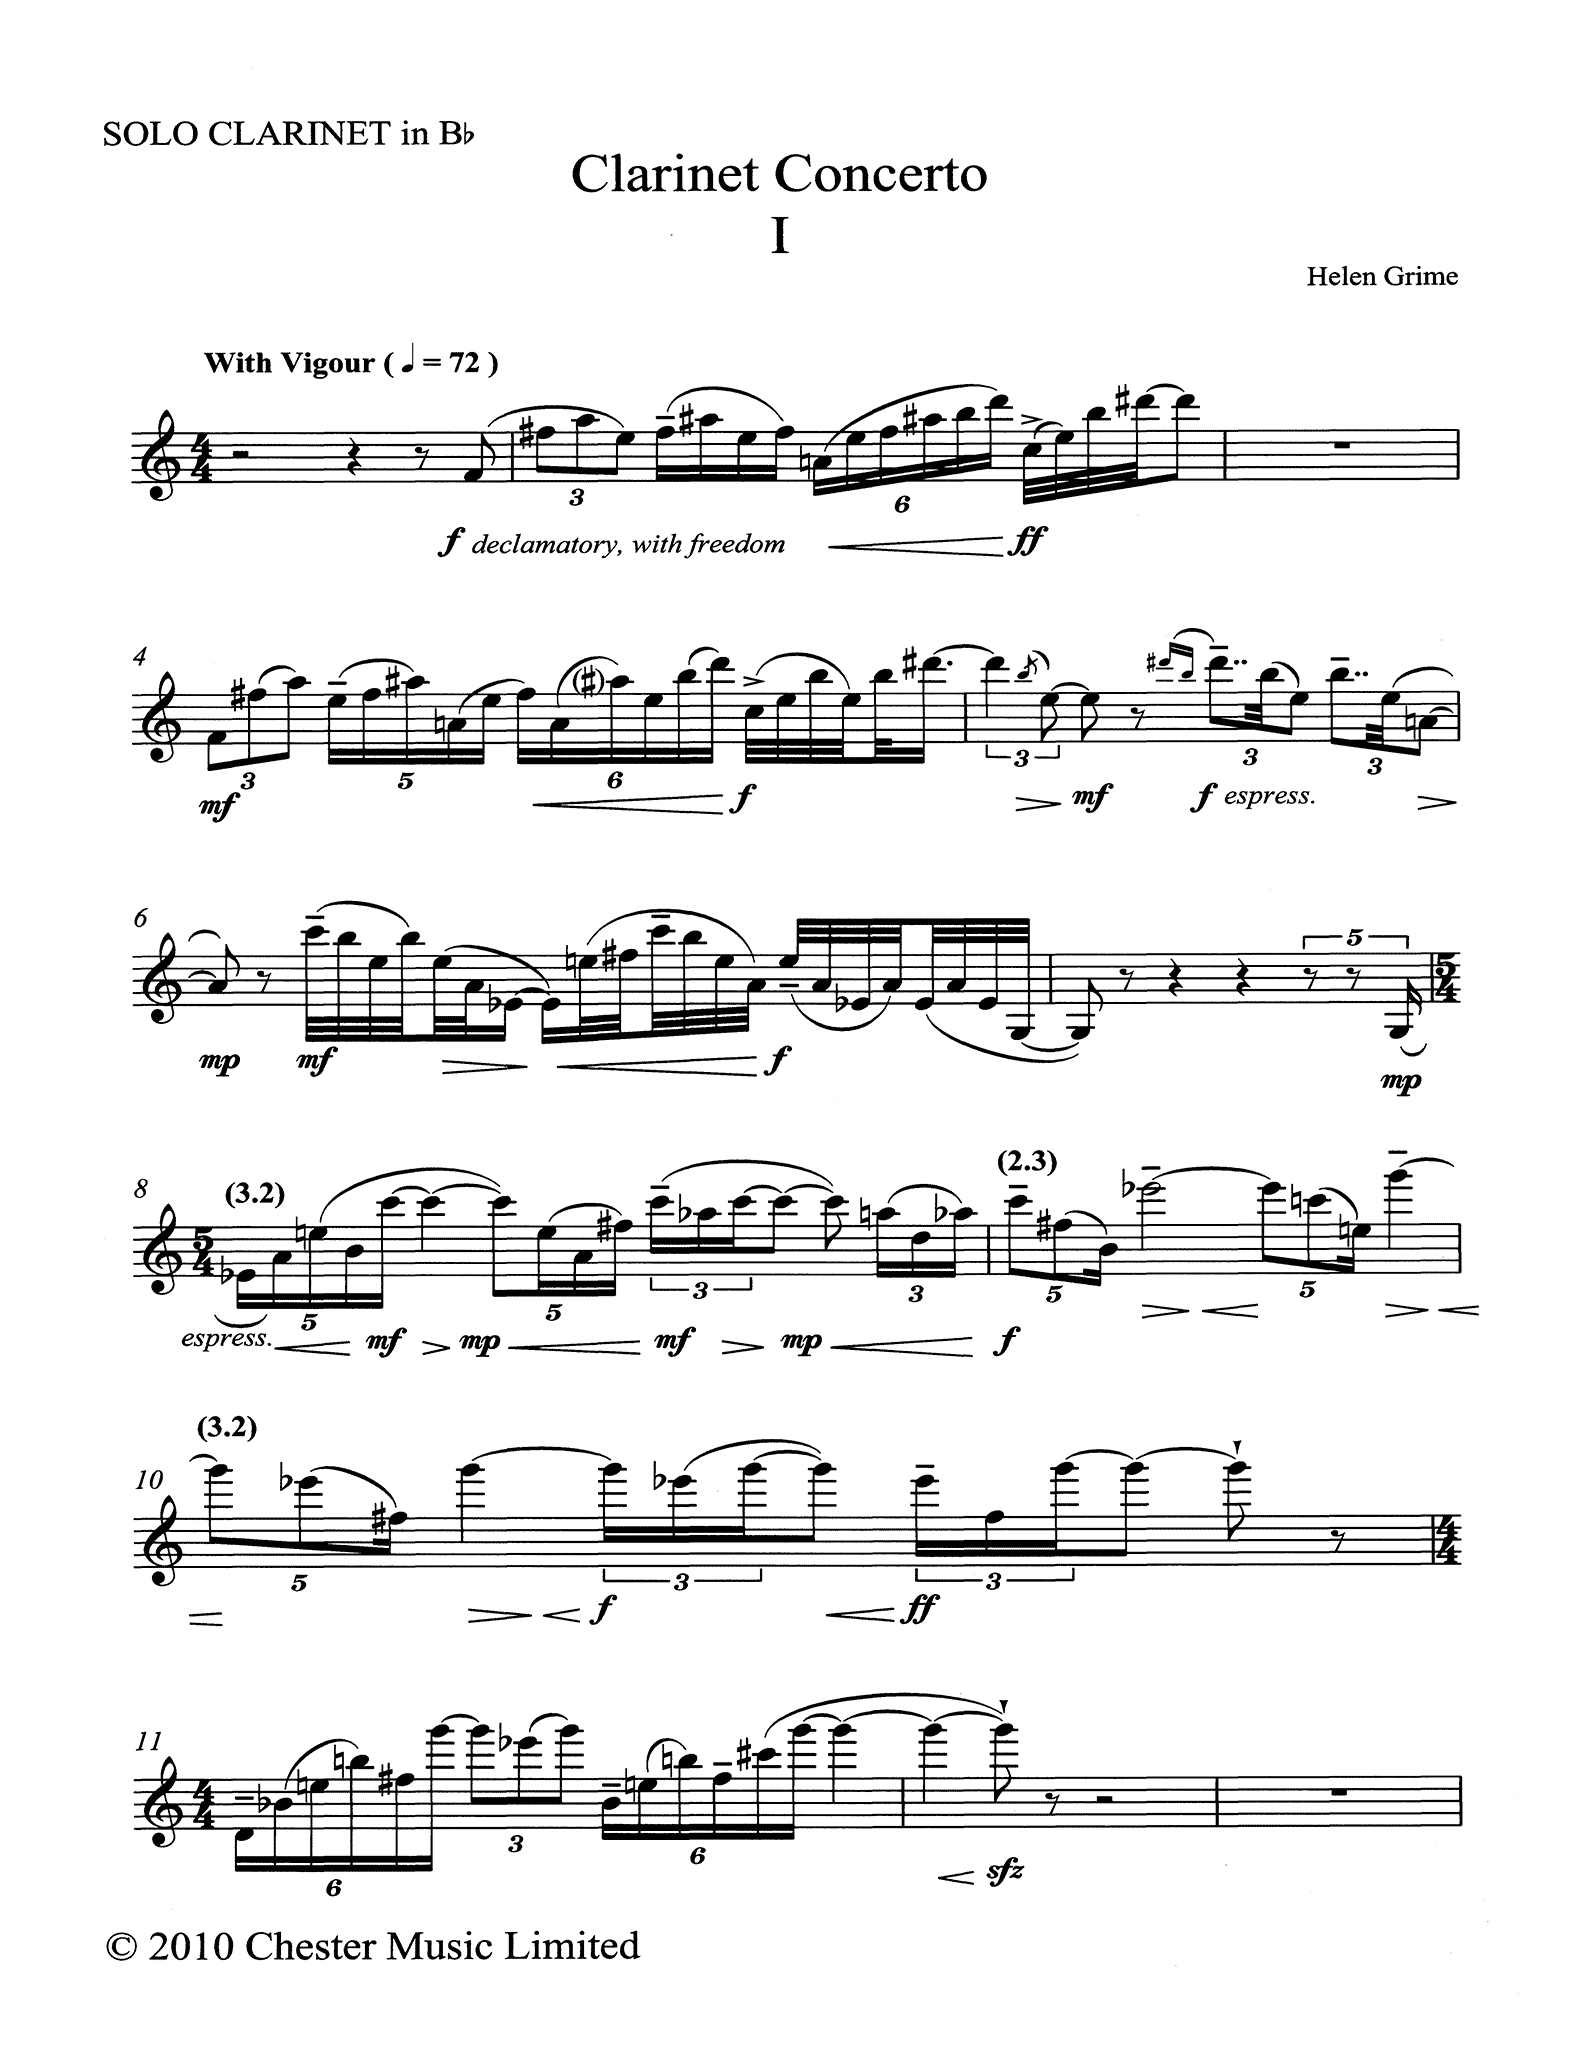 Helen Grime Clarinet Concerto piano reduction solo part